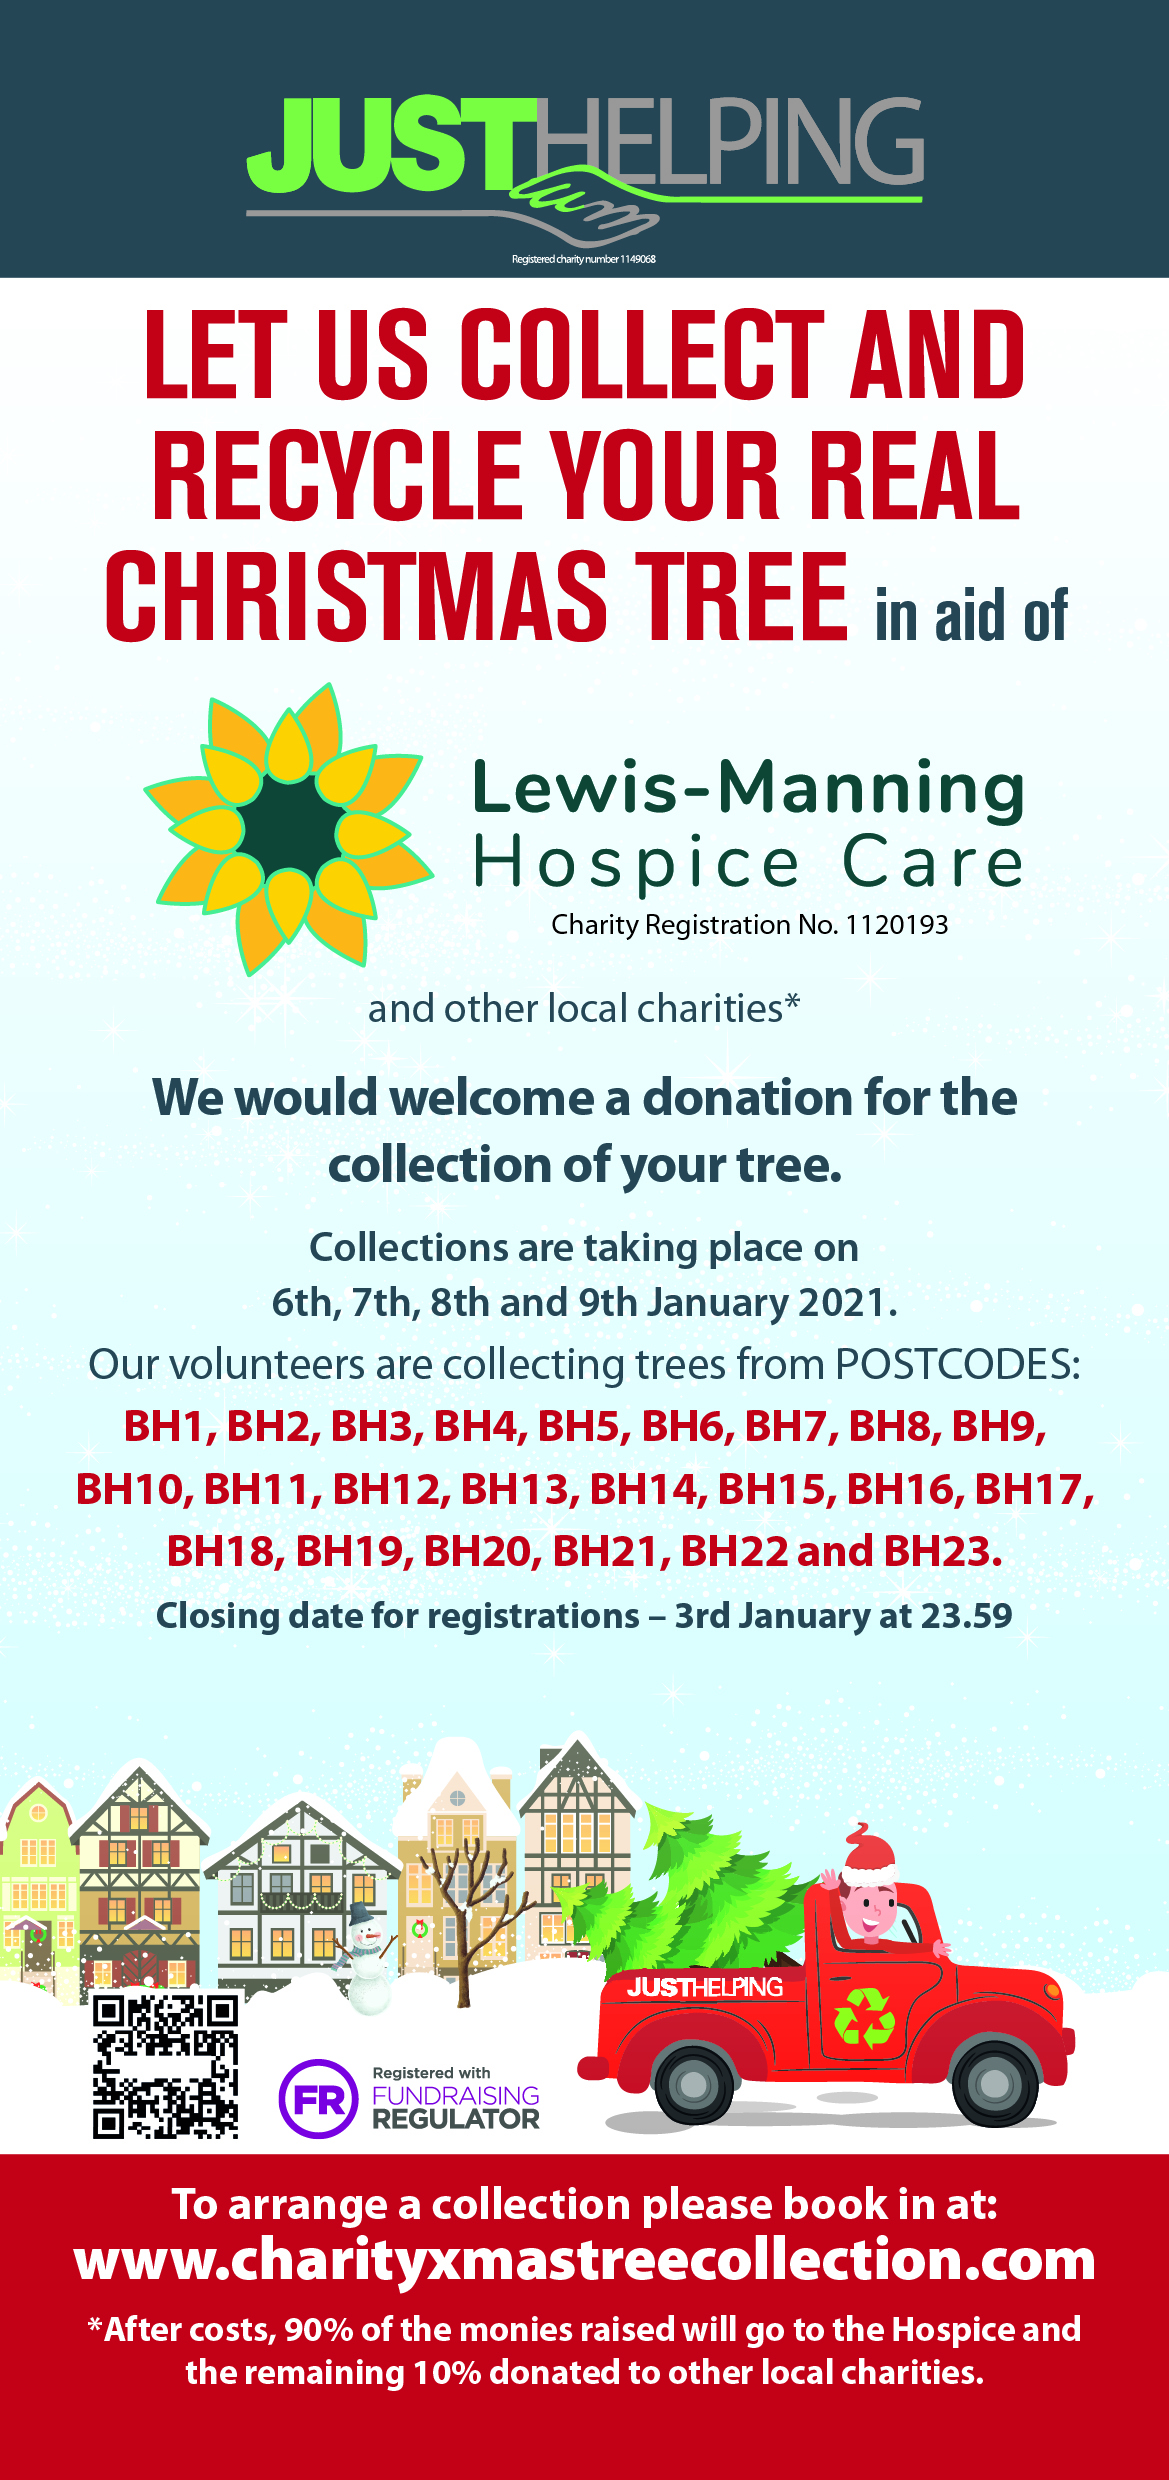 Lewis-Manning Hospice Care launch Christmas tree collection service